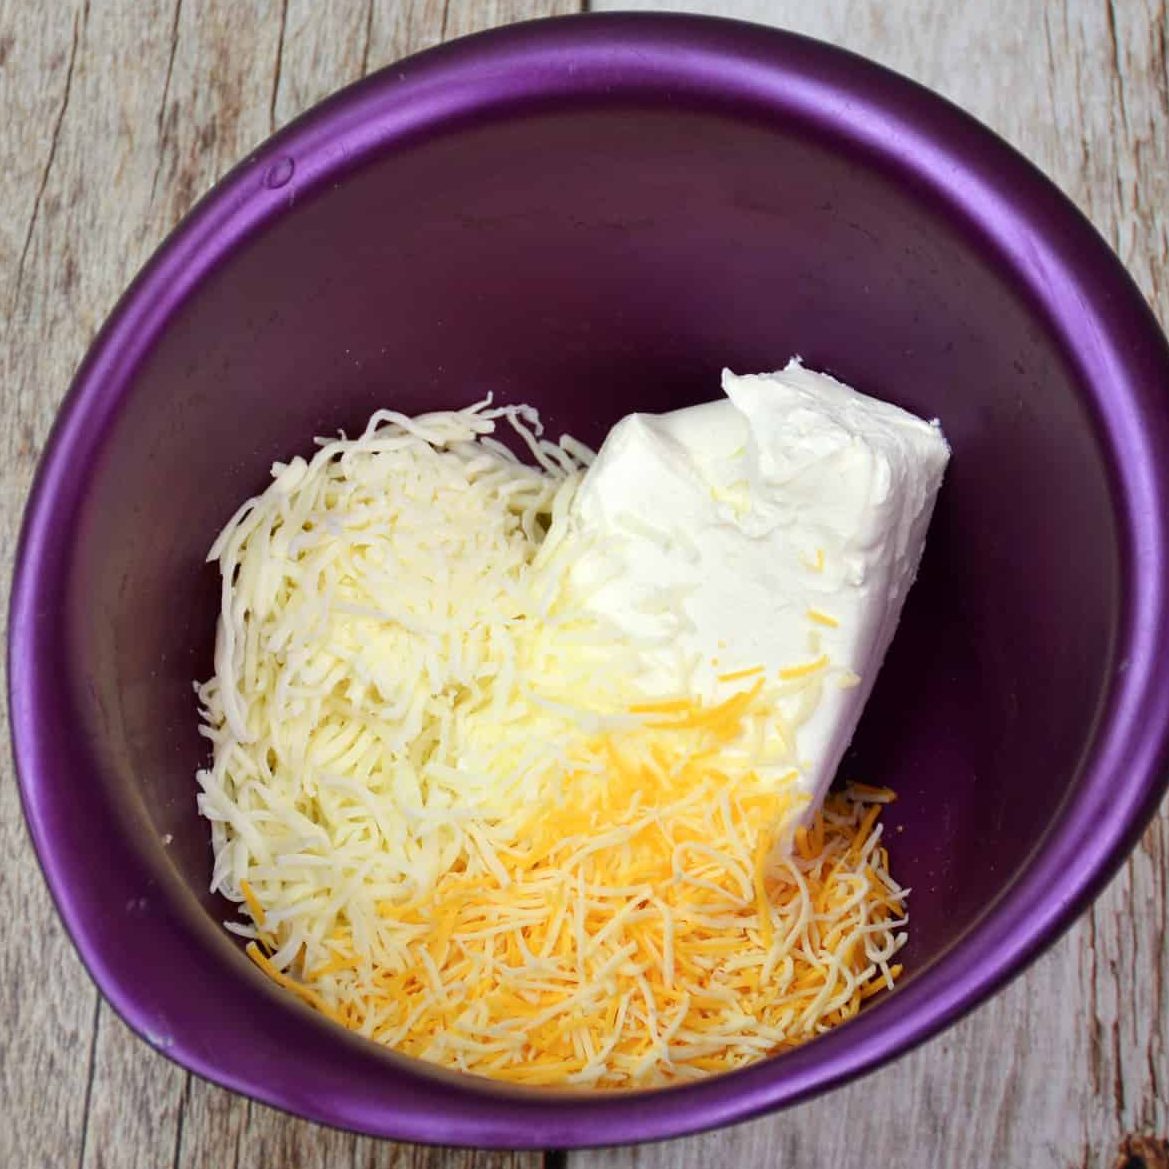 Using a large bowl, mix together the cream cheese, colby jack cheese, and mozzarella until combined.